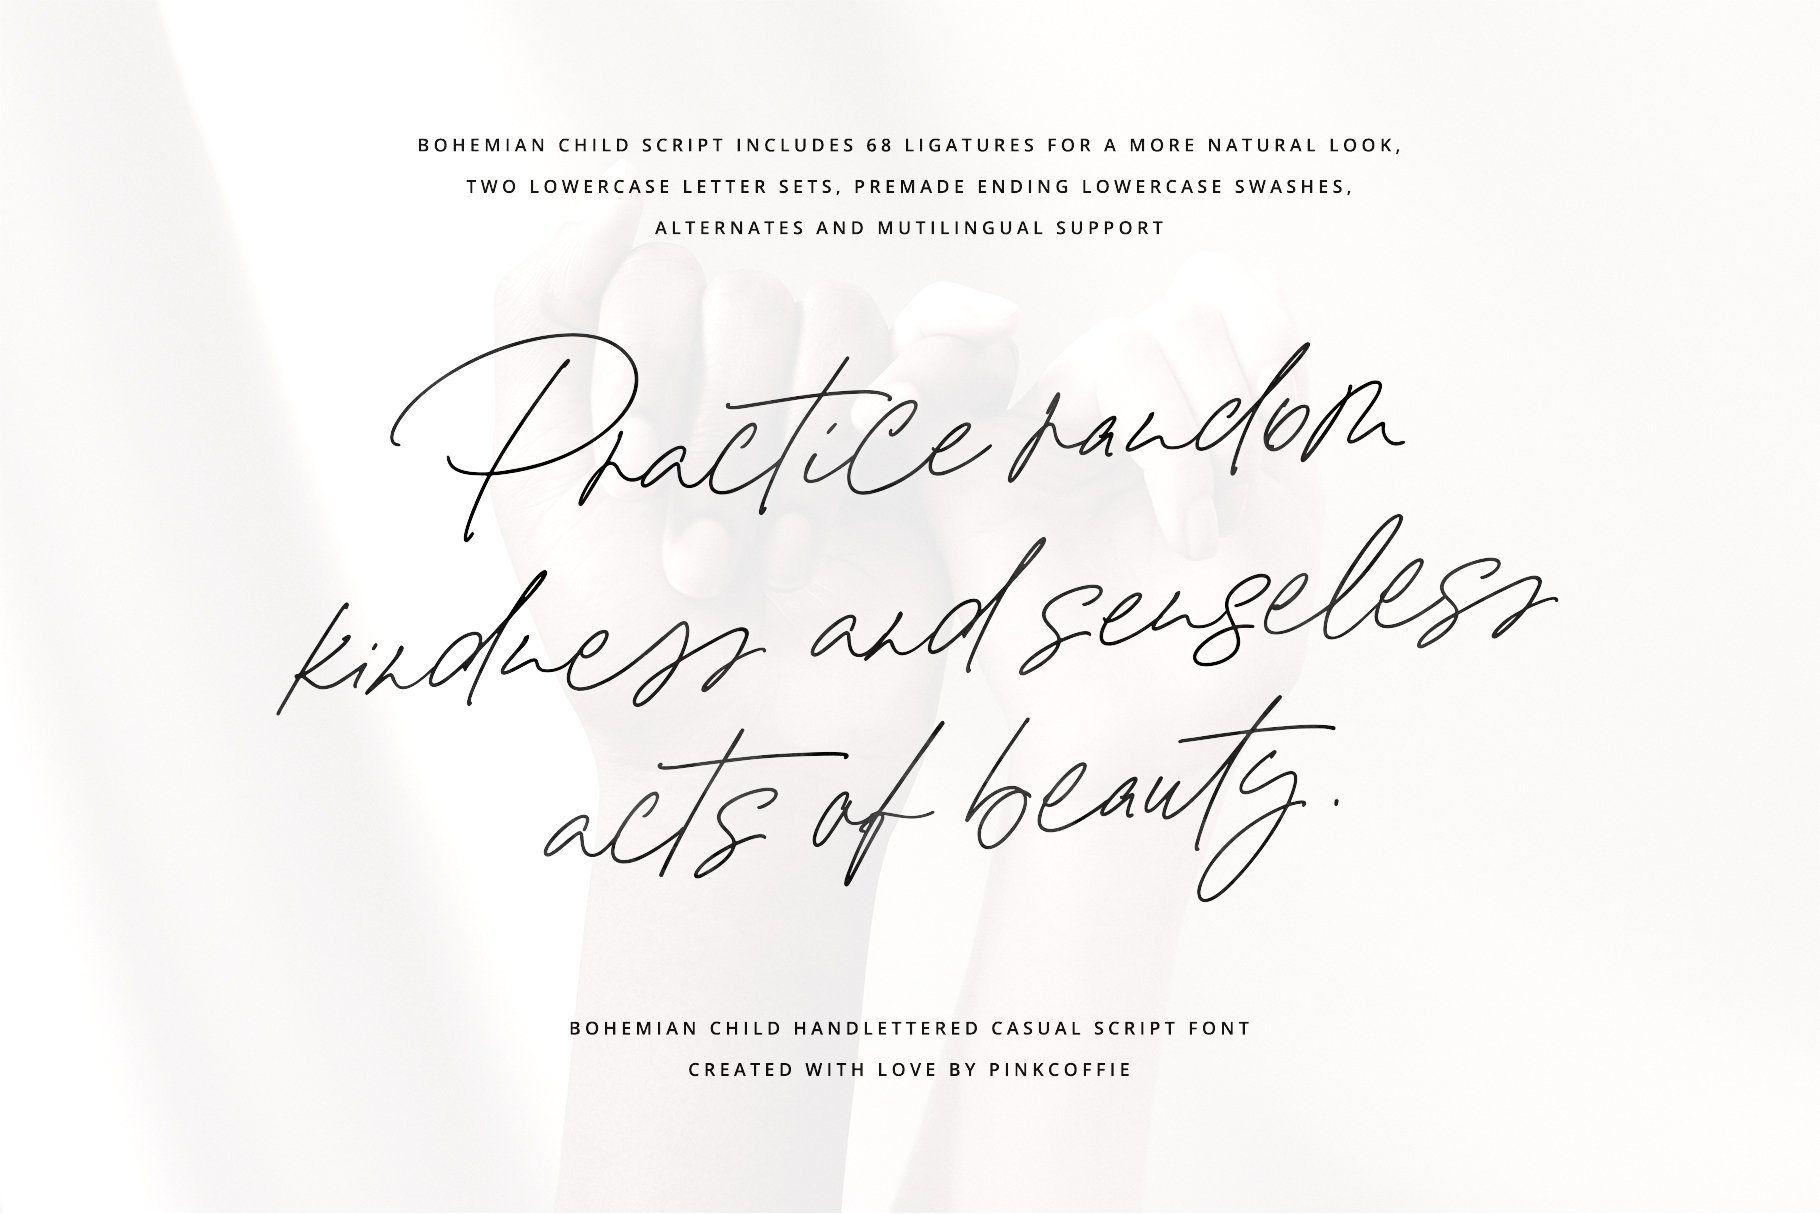 22 bohemian child casual modern chic handlettered script font by pinkcoffie kindness quote 399